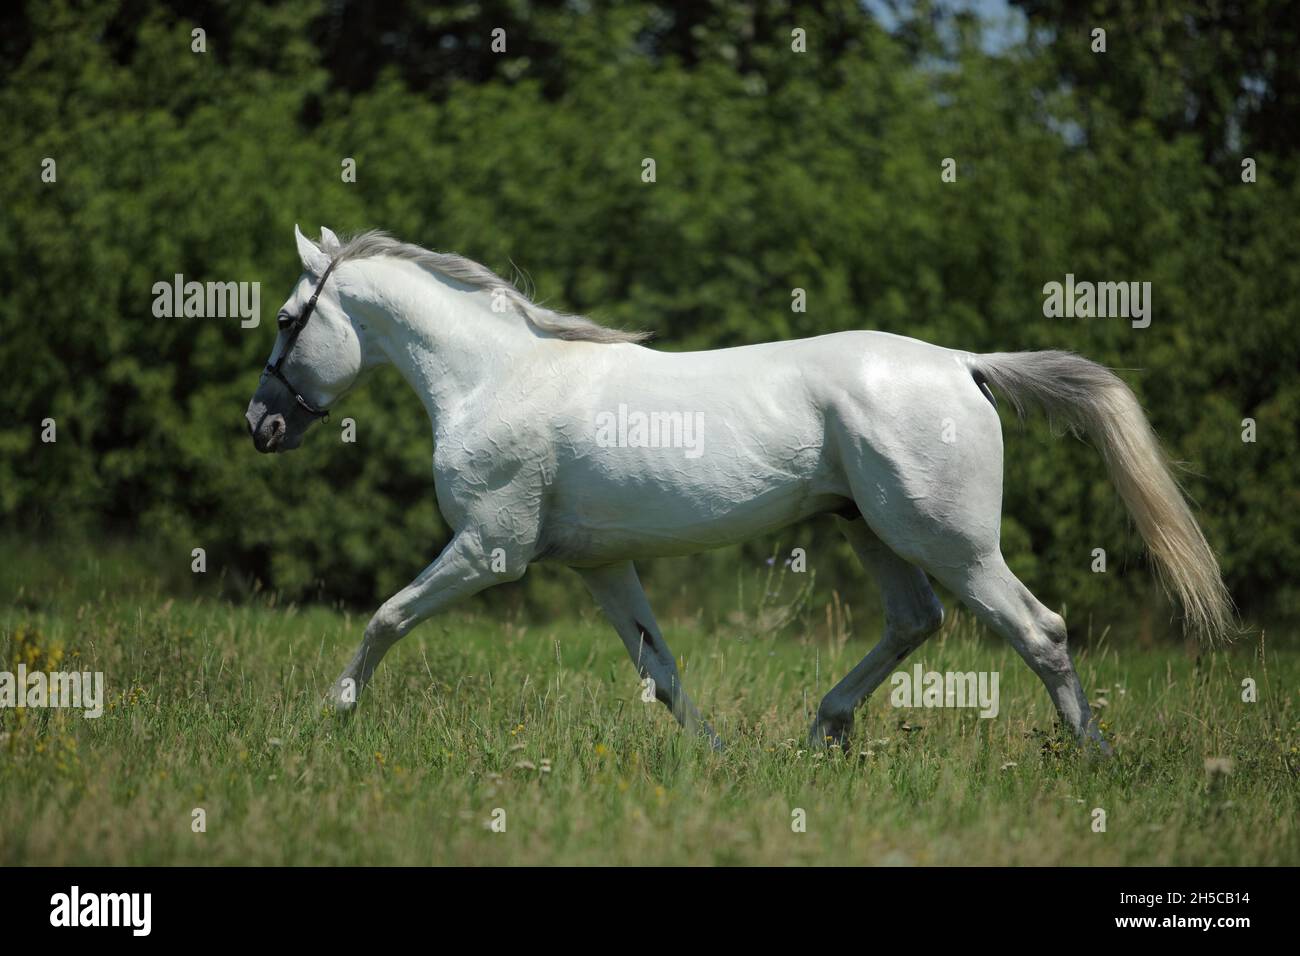 White andalusian horse runs gallop against green summer meadow Stock Photo